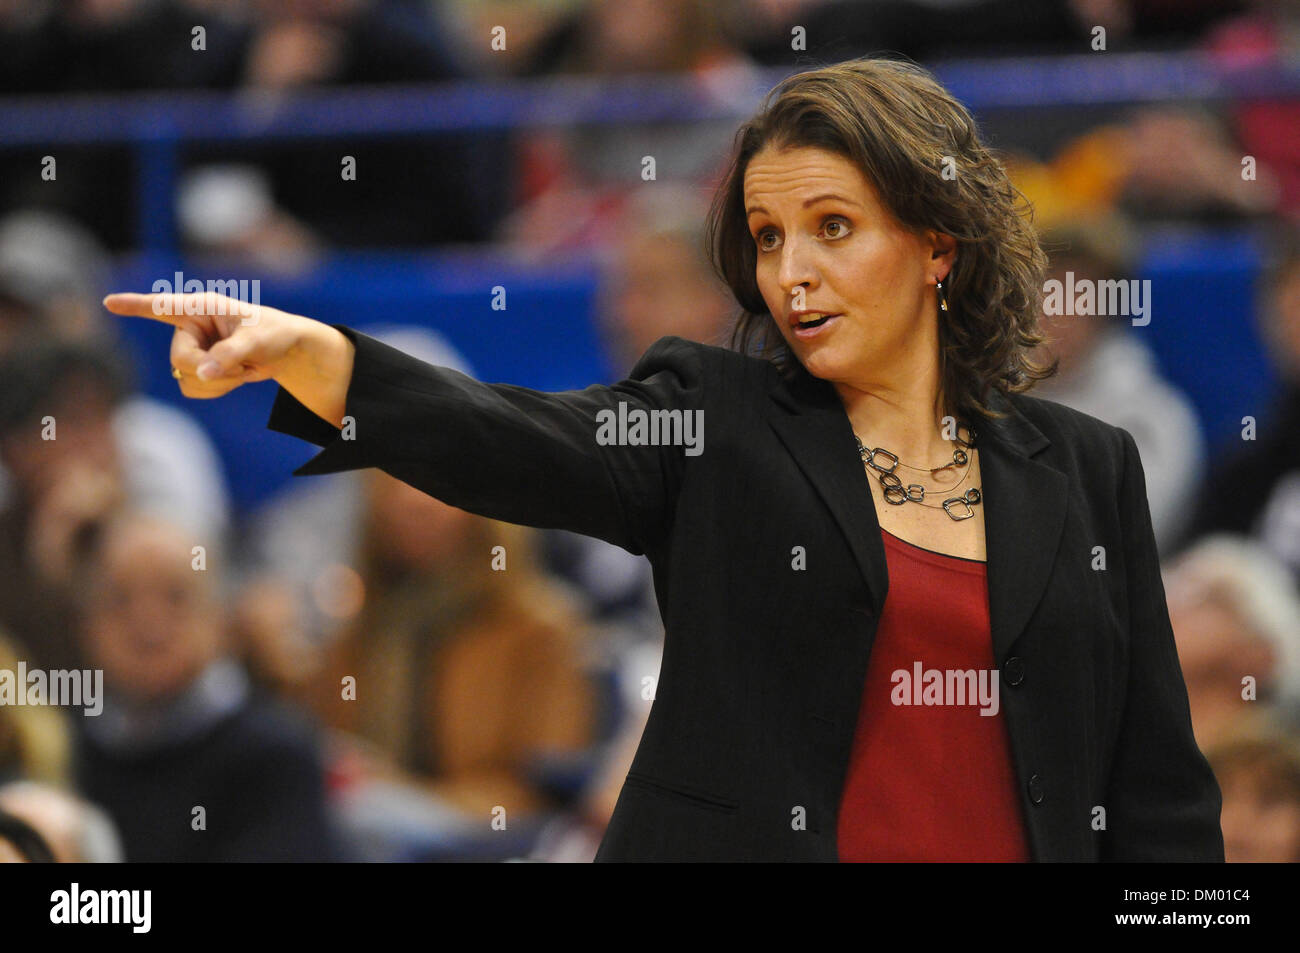 Dec. 10, 2009 - Hartford, Connecticut, U.S - 10 December 2009: Hartford Head Coach Jennifer Rizzotti during game action in the first half. Connecticut leads Hartford 44 - 16 at the half held at XL Center in Hartford, Connecticut. (Credit Image: © Geoff Bolte/Southcreek Global/ZUMApress.com) Stock Photo